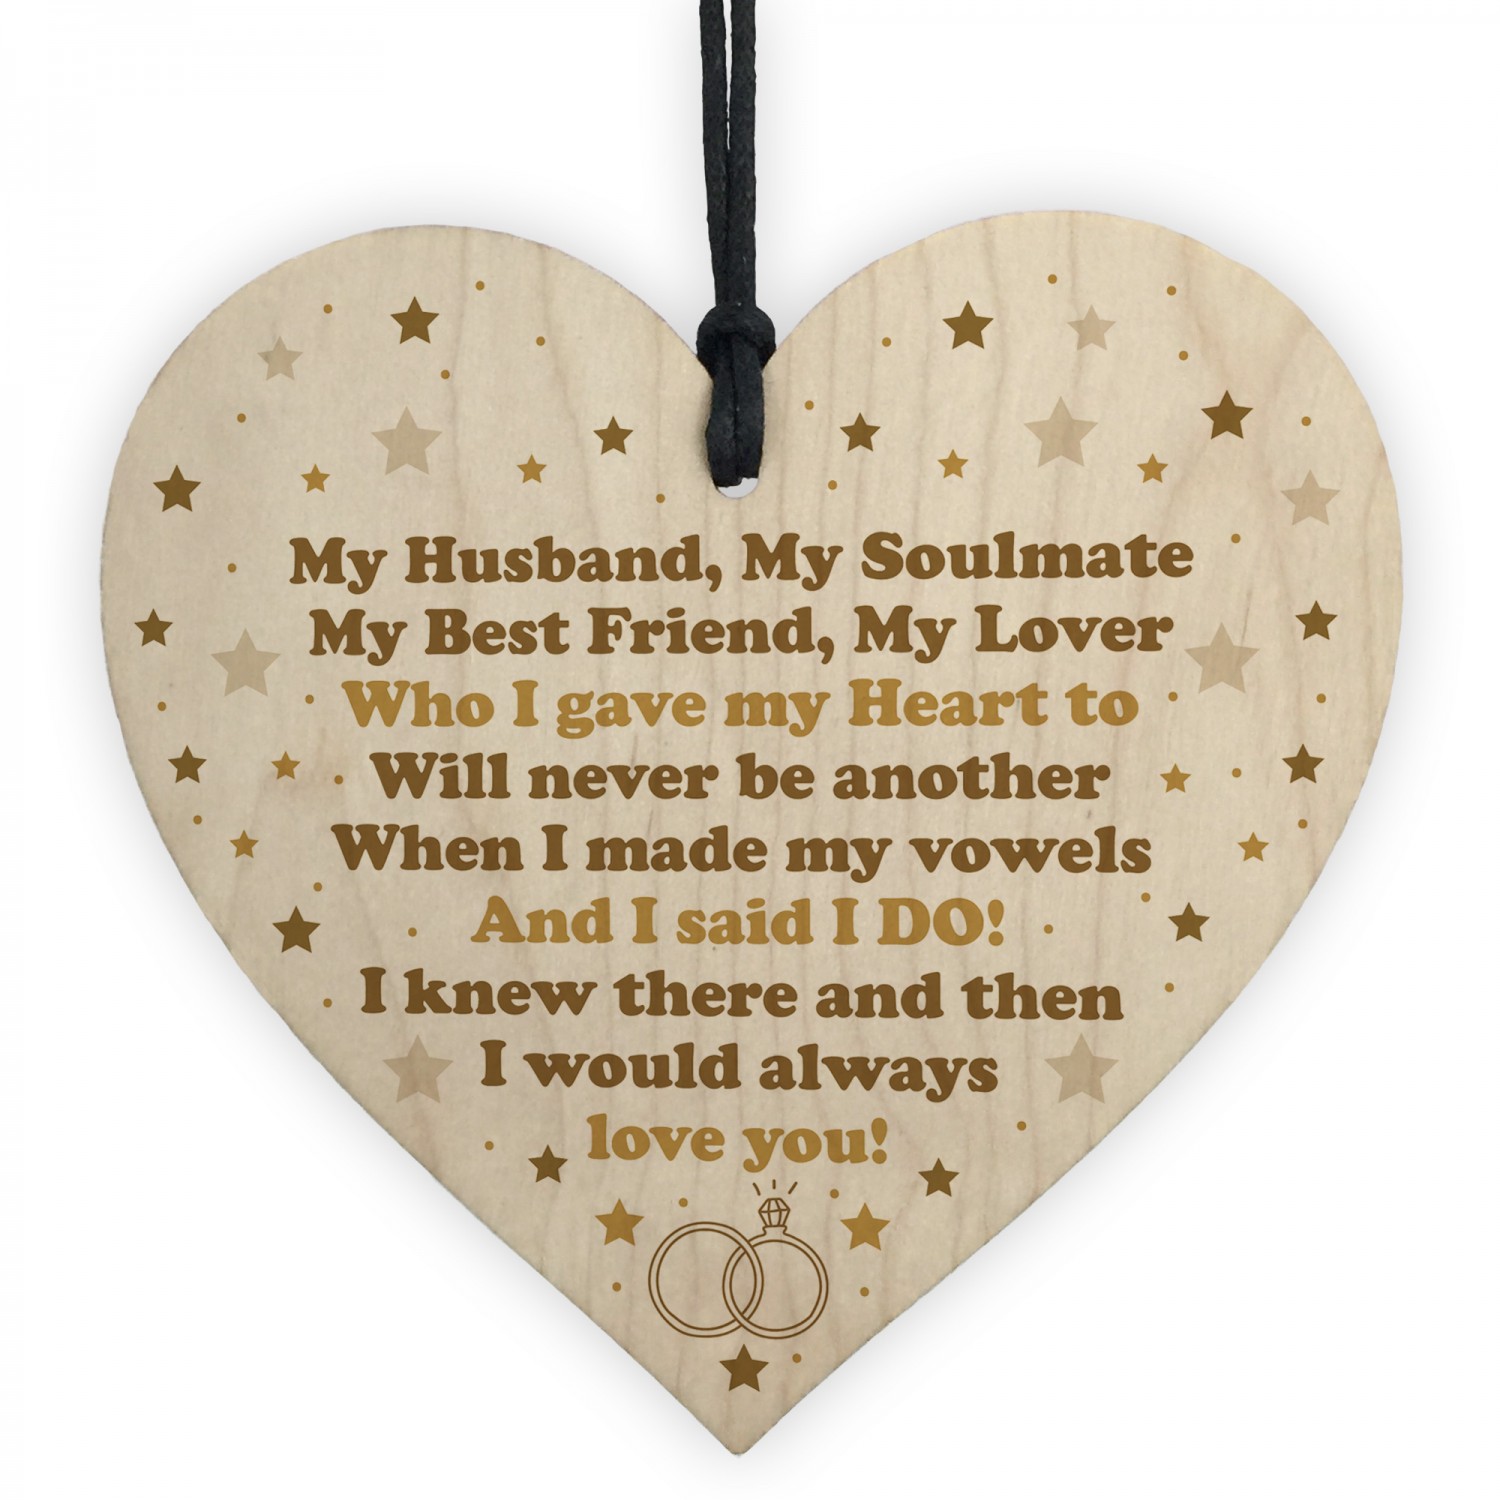 15+ Unique and beautiful wedding anniversary gift ideas for parent… |  Unique wedding anniversary gifts, 40th wedding anniversary gifts, 50  wedding anniversary gifts